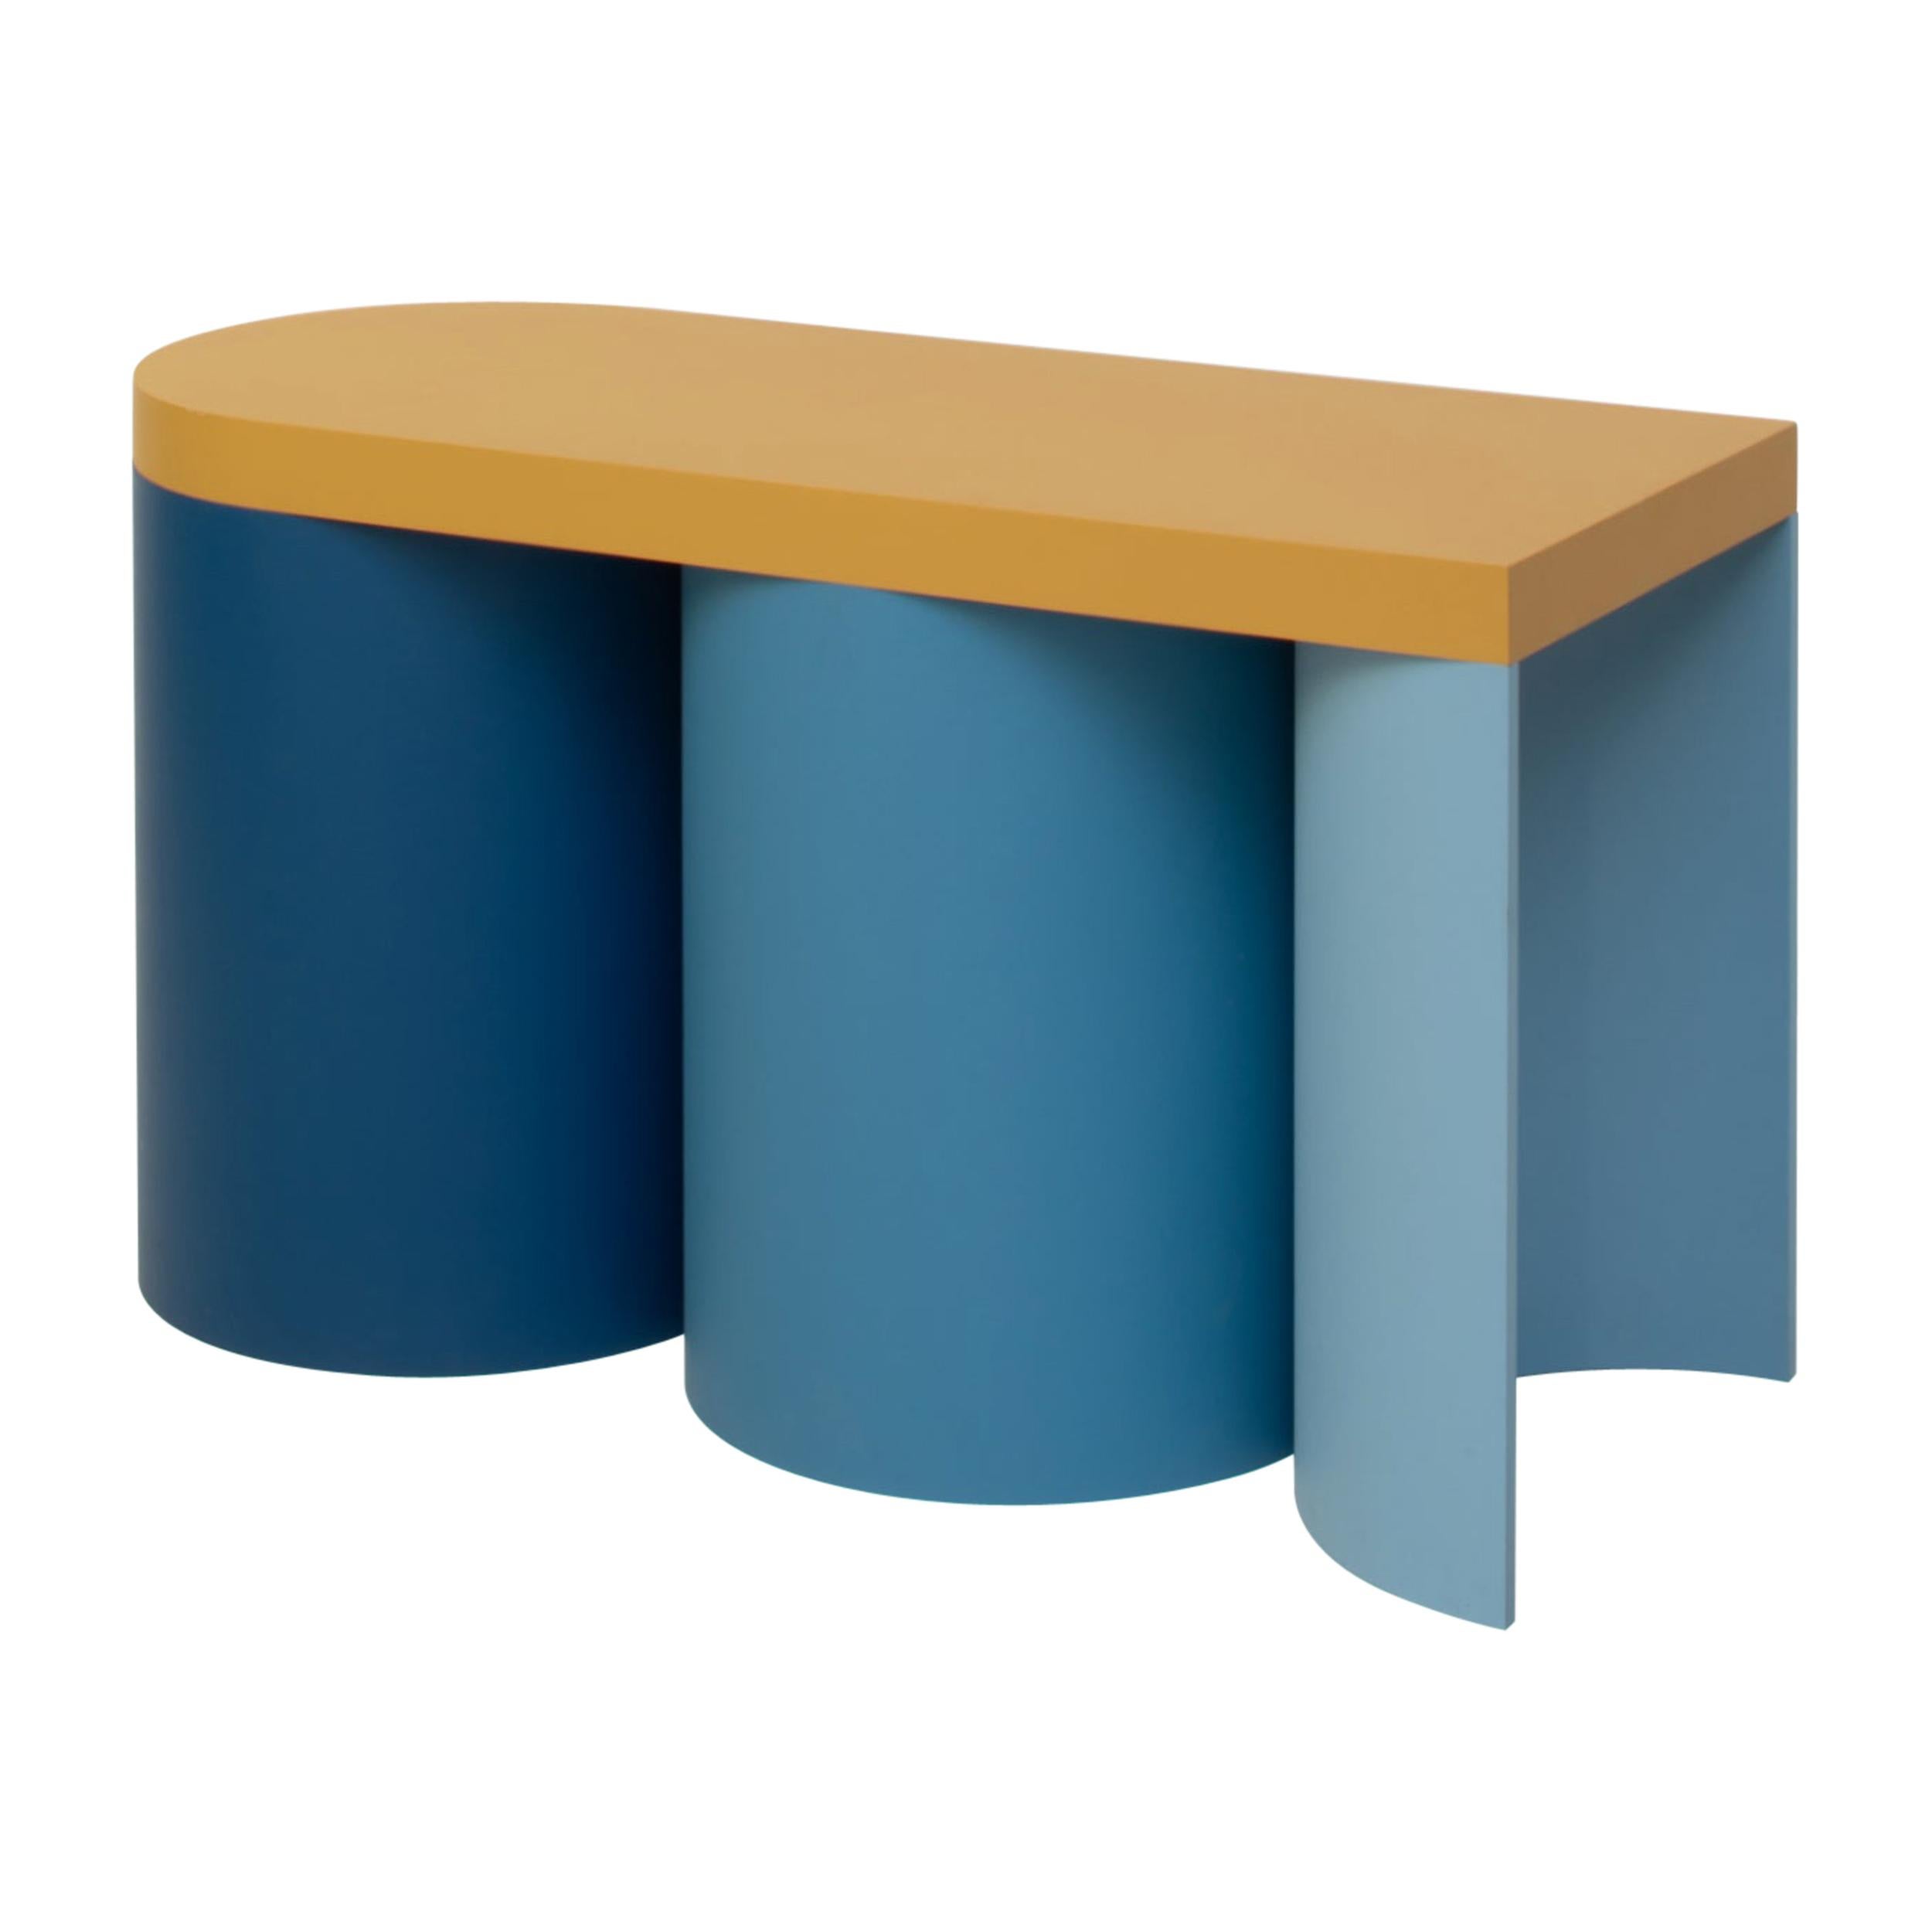 Stool Colorful Design Modern Contemporary Seating Rounded Shapes Form Stool 4